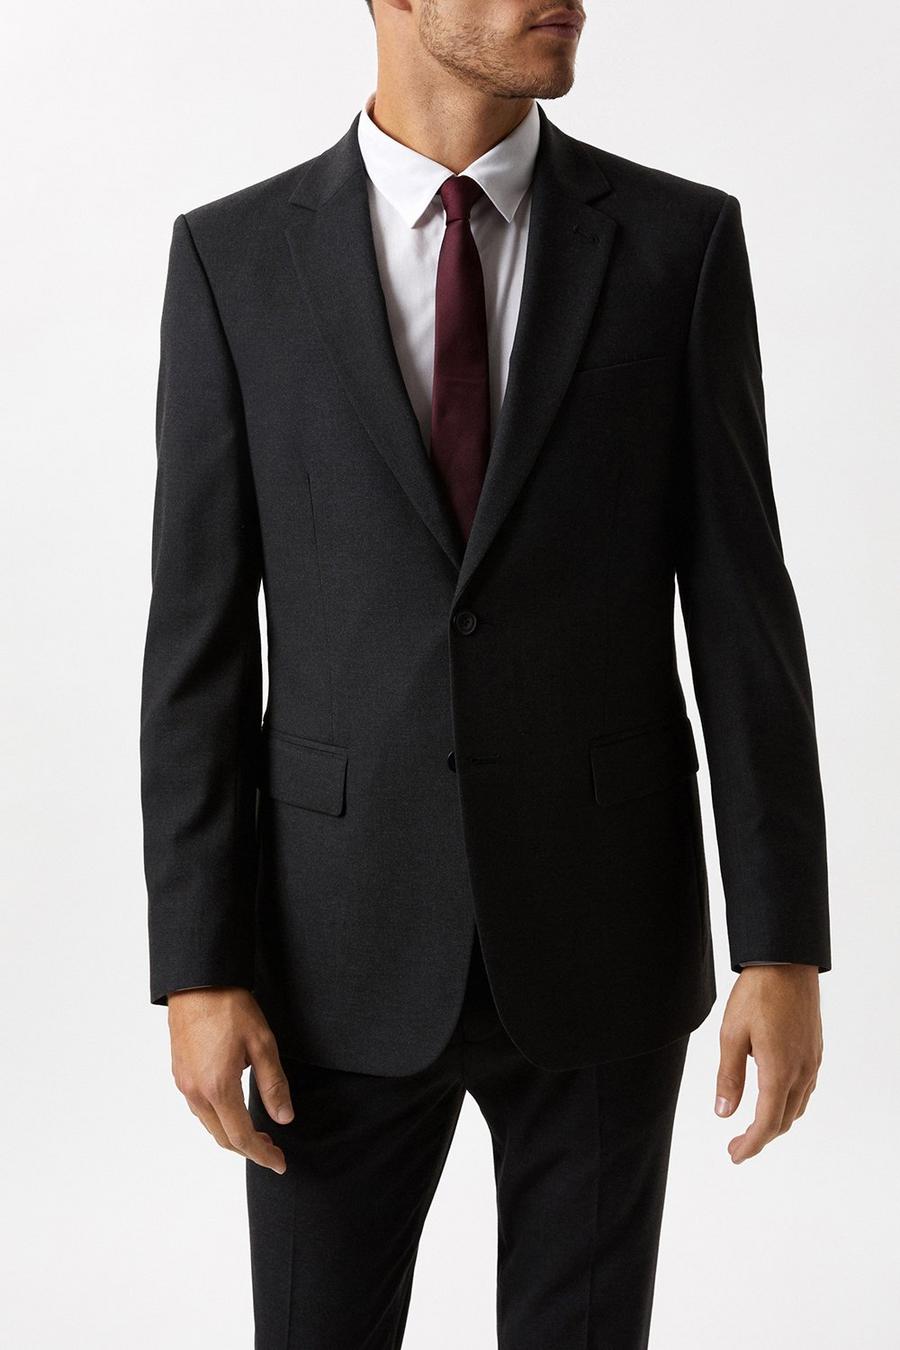 Plus And Tall Tailored Charcoal Essential Three - Piece Suit